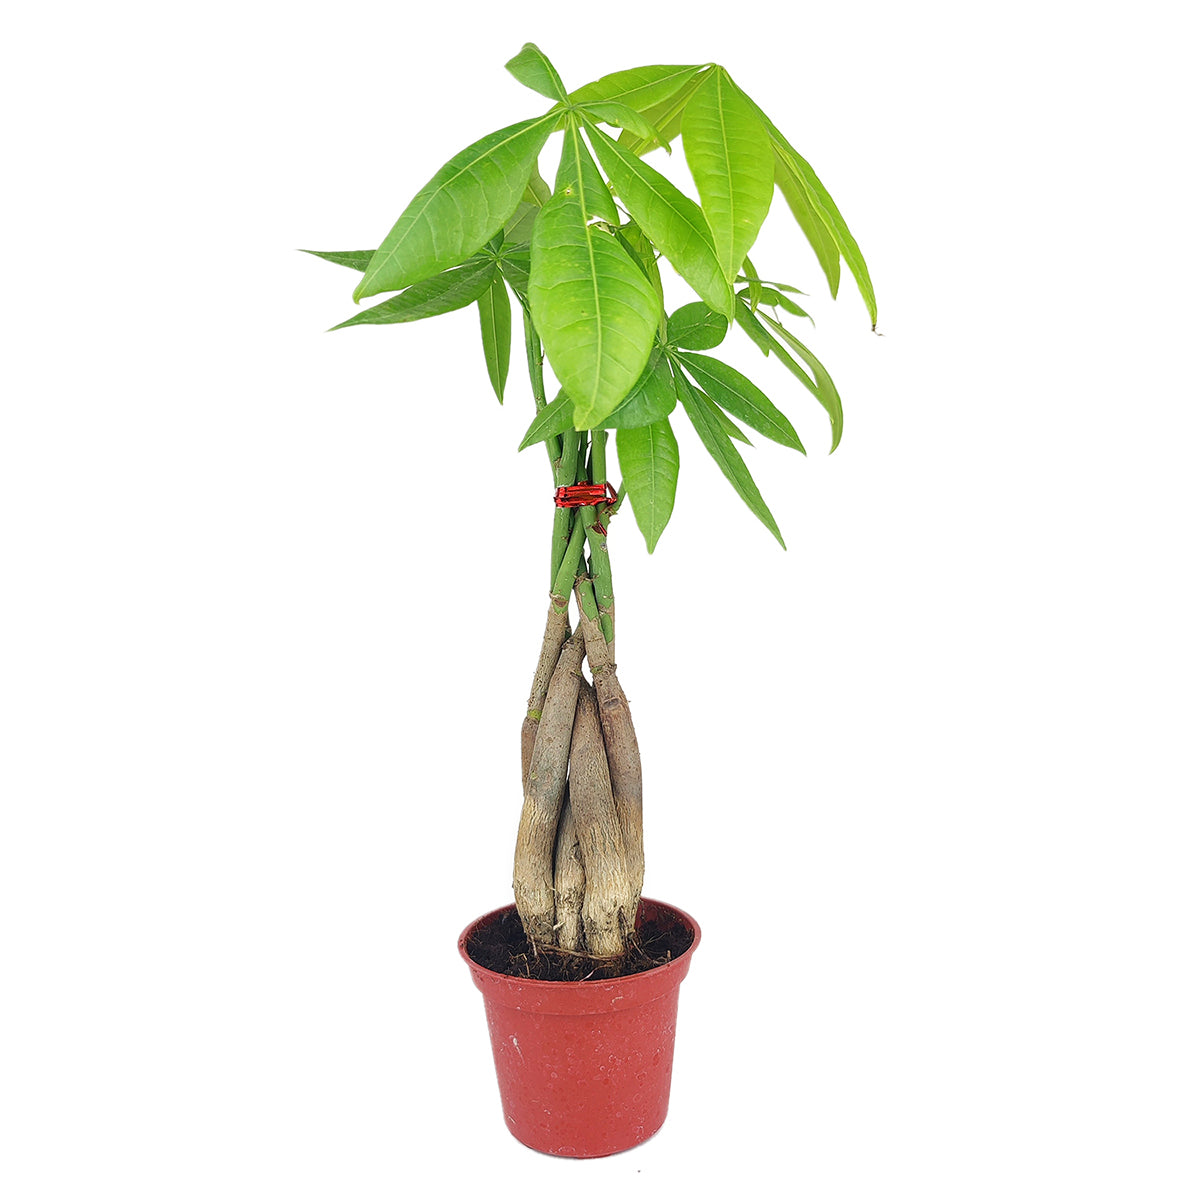 Braided Pachira Stump Money Tree, Feng Shui plant, best houseplants, easy care houseplant, gift plant, lucky plant